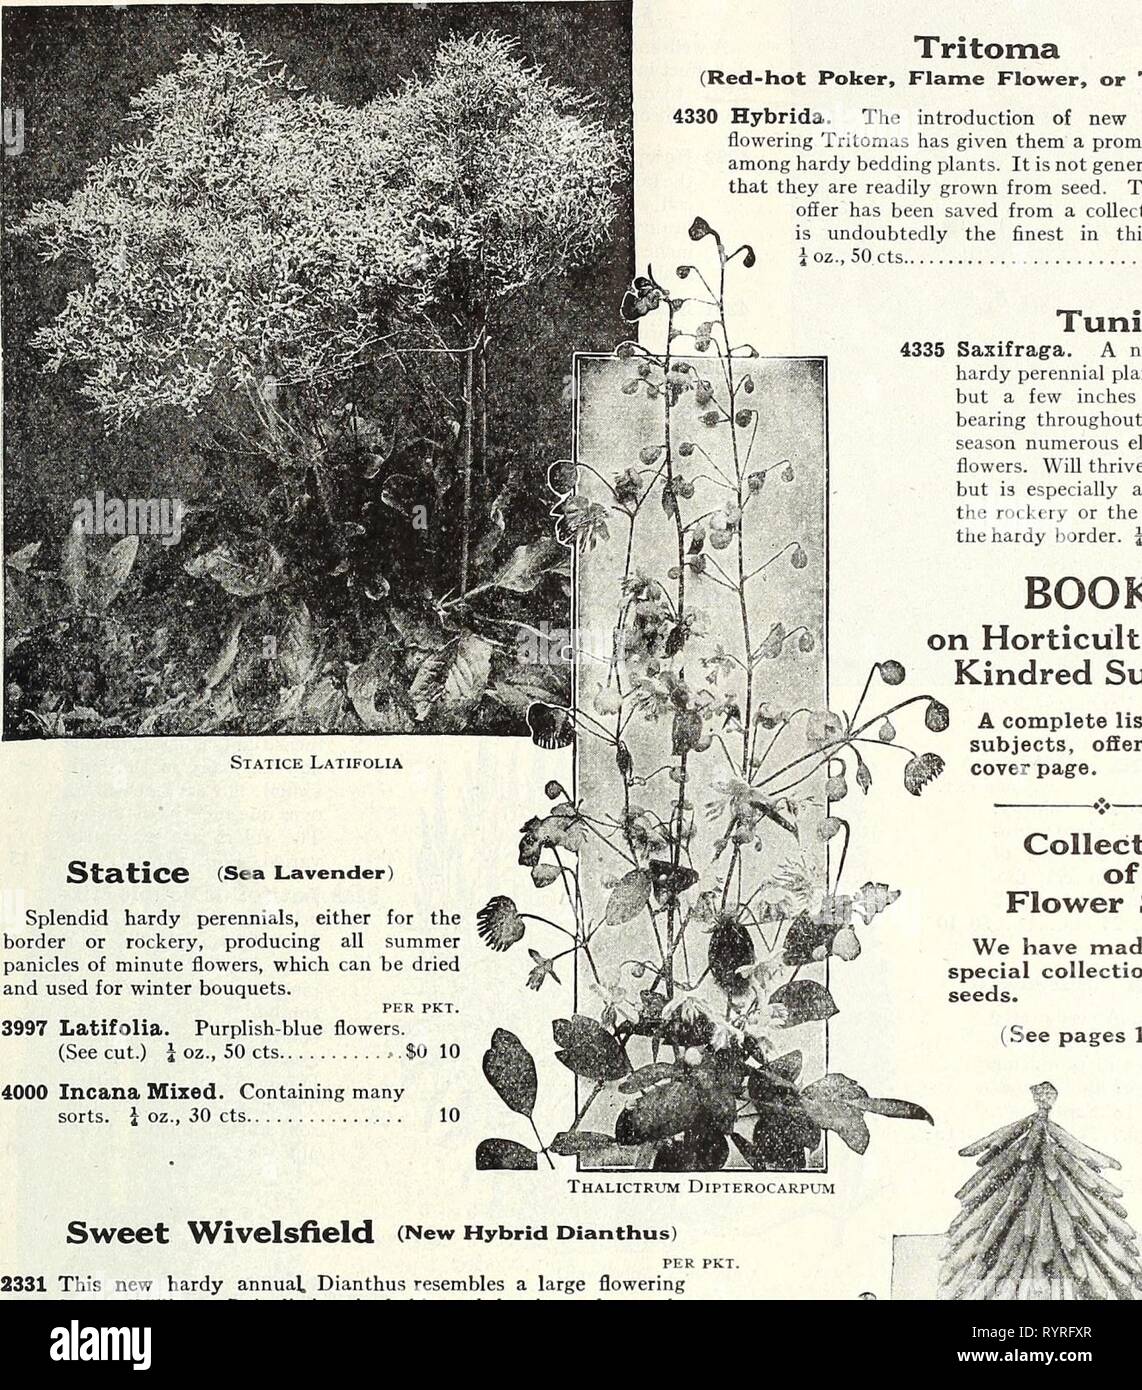 Dreer's midsummer list 1931 (1931) Dreer's midsummer list 1931 . dreersmidsummerl1931henr Year: 1931  DREER'S FLOWER SEEDS FOR SUMMER SOWING 21 (Red-hot Poker, Flame Flower, or Torch Lily) PER PKT. 4330 Hybrida. The introduction of new continuous waring Tritomas lias given them a prominent place among hardy bedding plants. It is not generally known that they are readily grown from seed. The seed we offer has been saved from a collection, which ^   is undoubtedly the finest in this country. i oz., 50 cts    15 Tunica 4335 Saxifraga. A neat, tufted hardy perennial plant, growing but a few inche Stock Photo